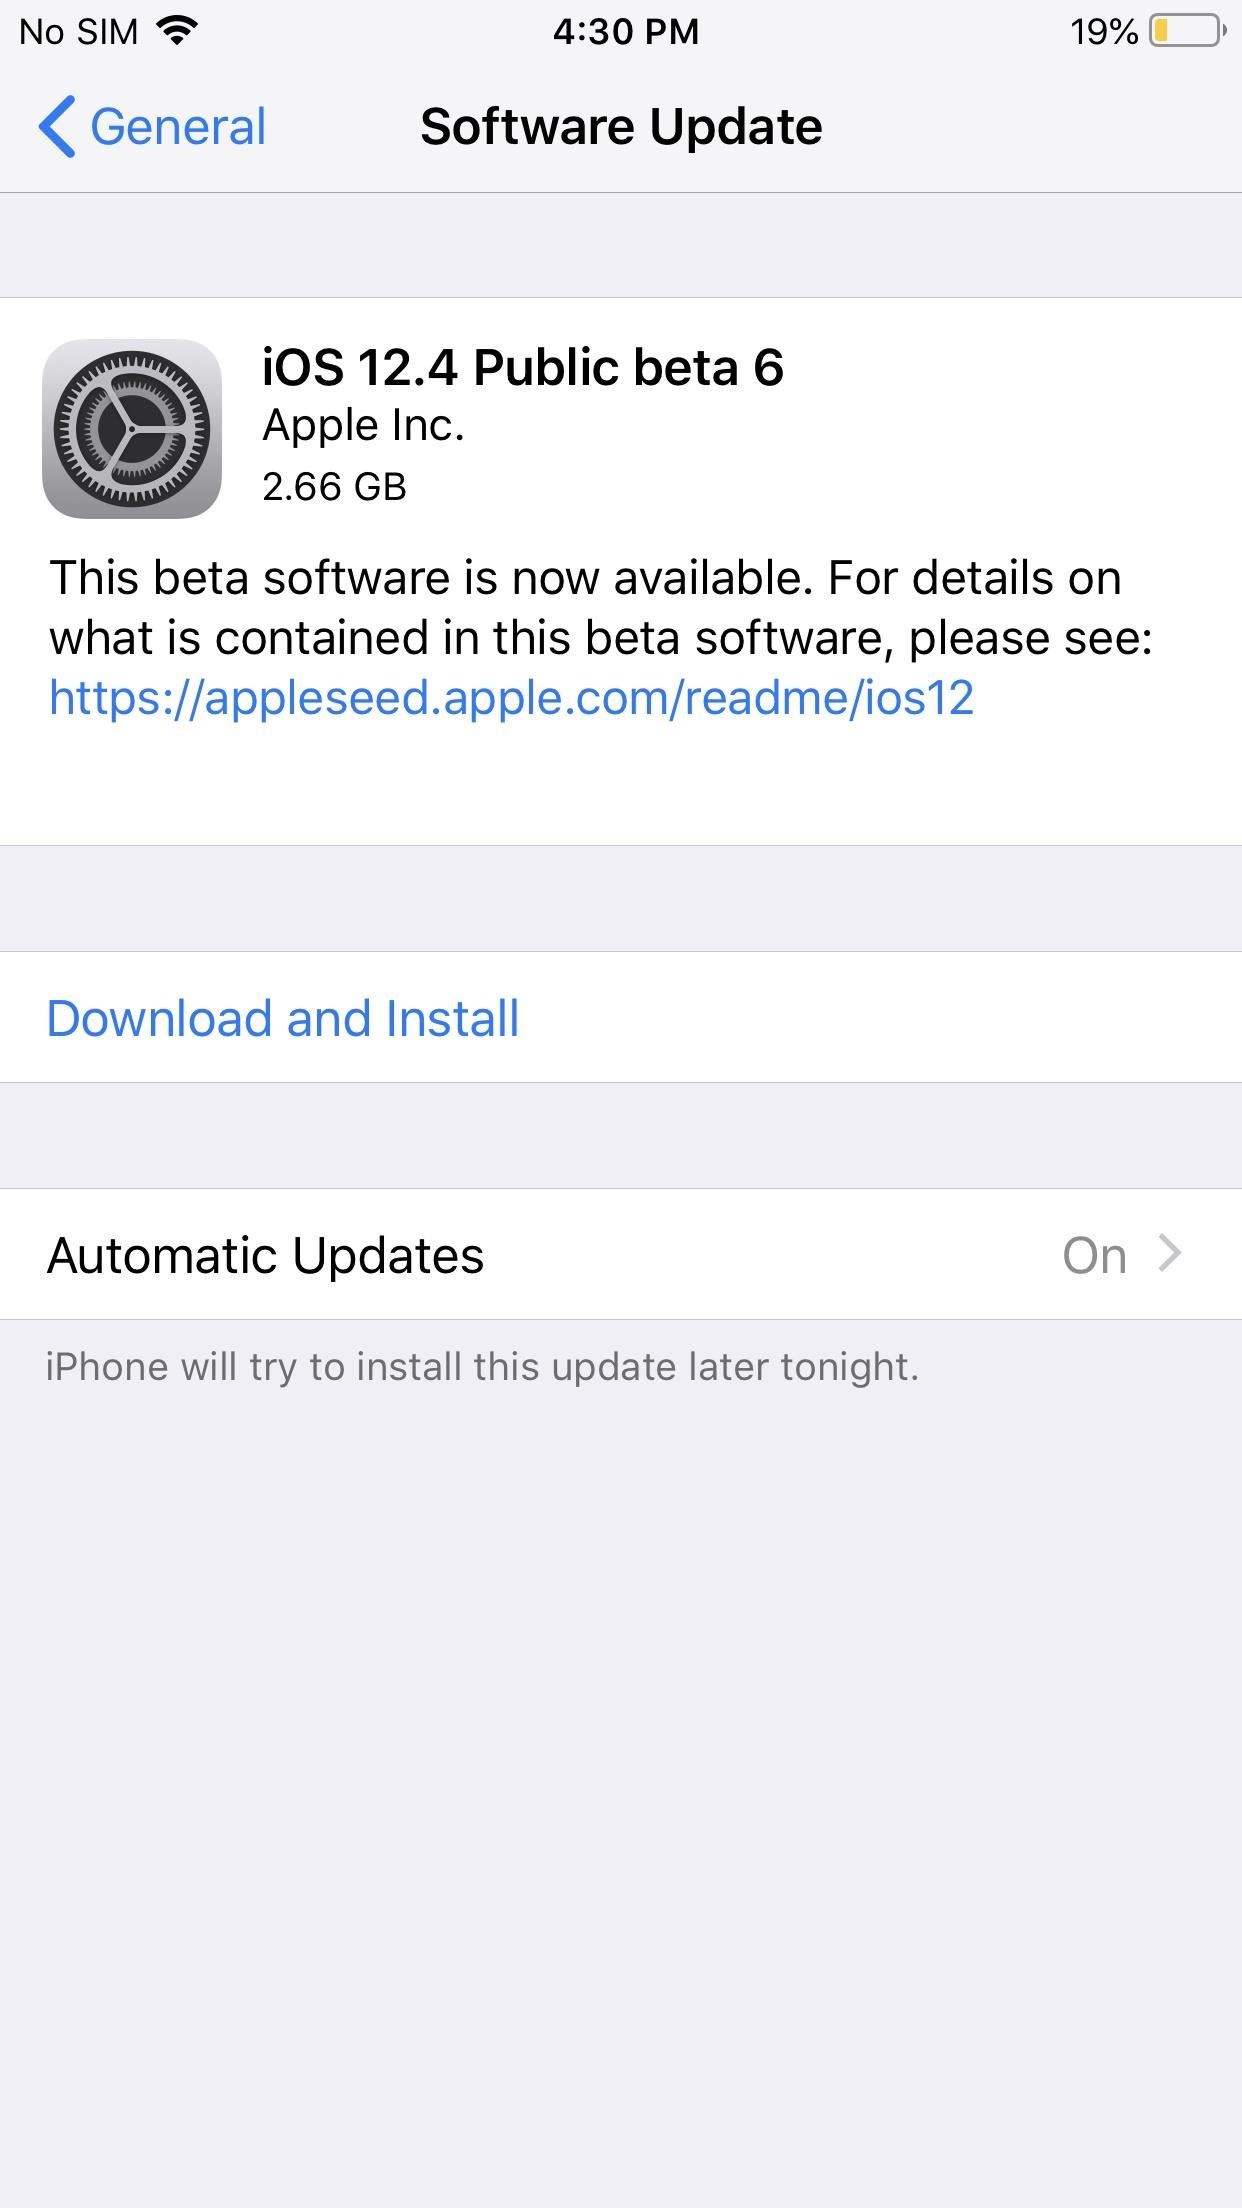 Apple Just Released iOS 12.4 Beta 6 for Developers & Public Testers